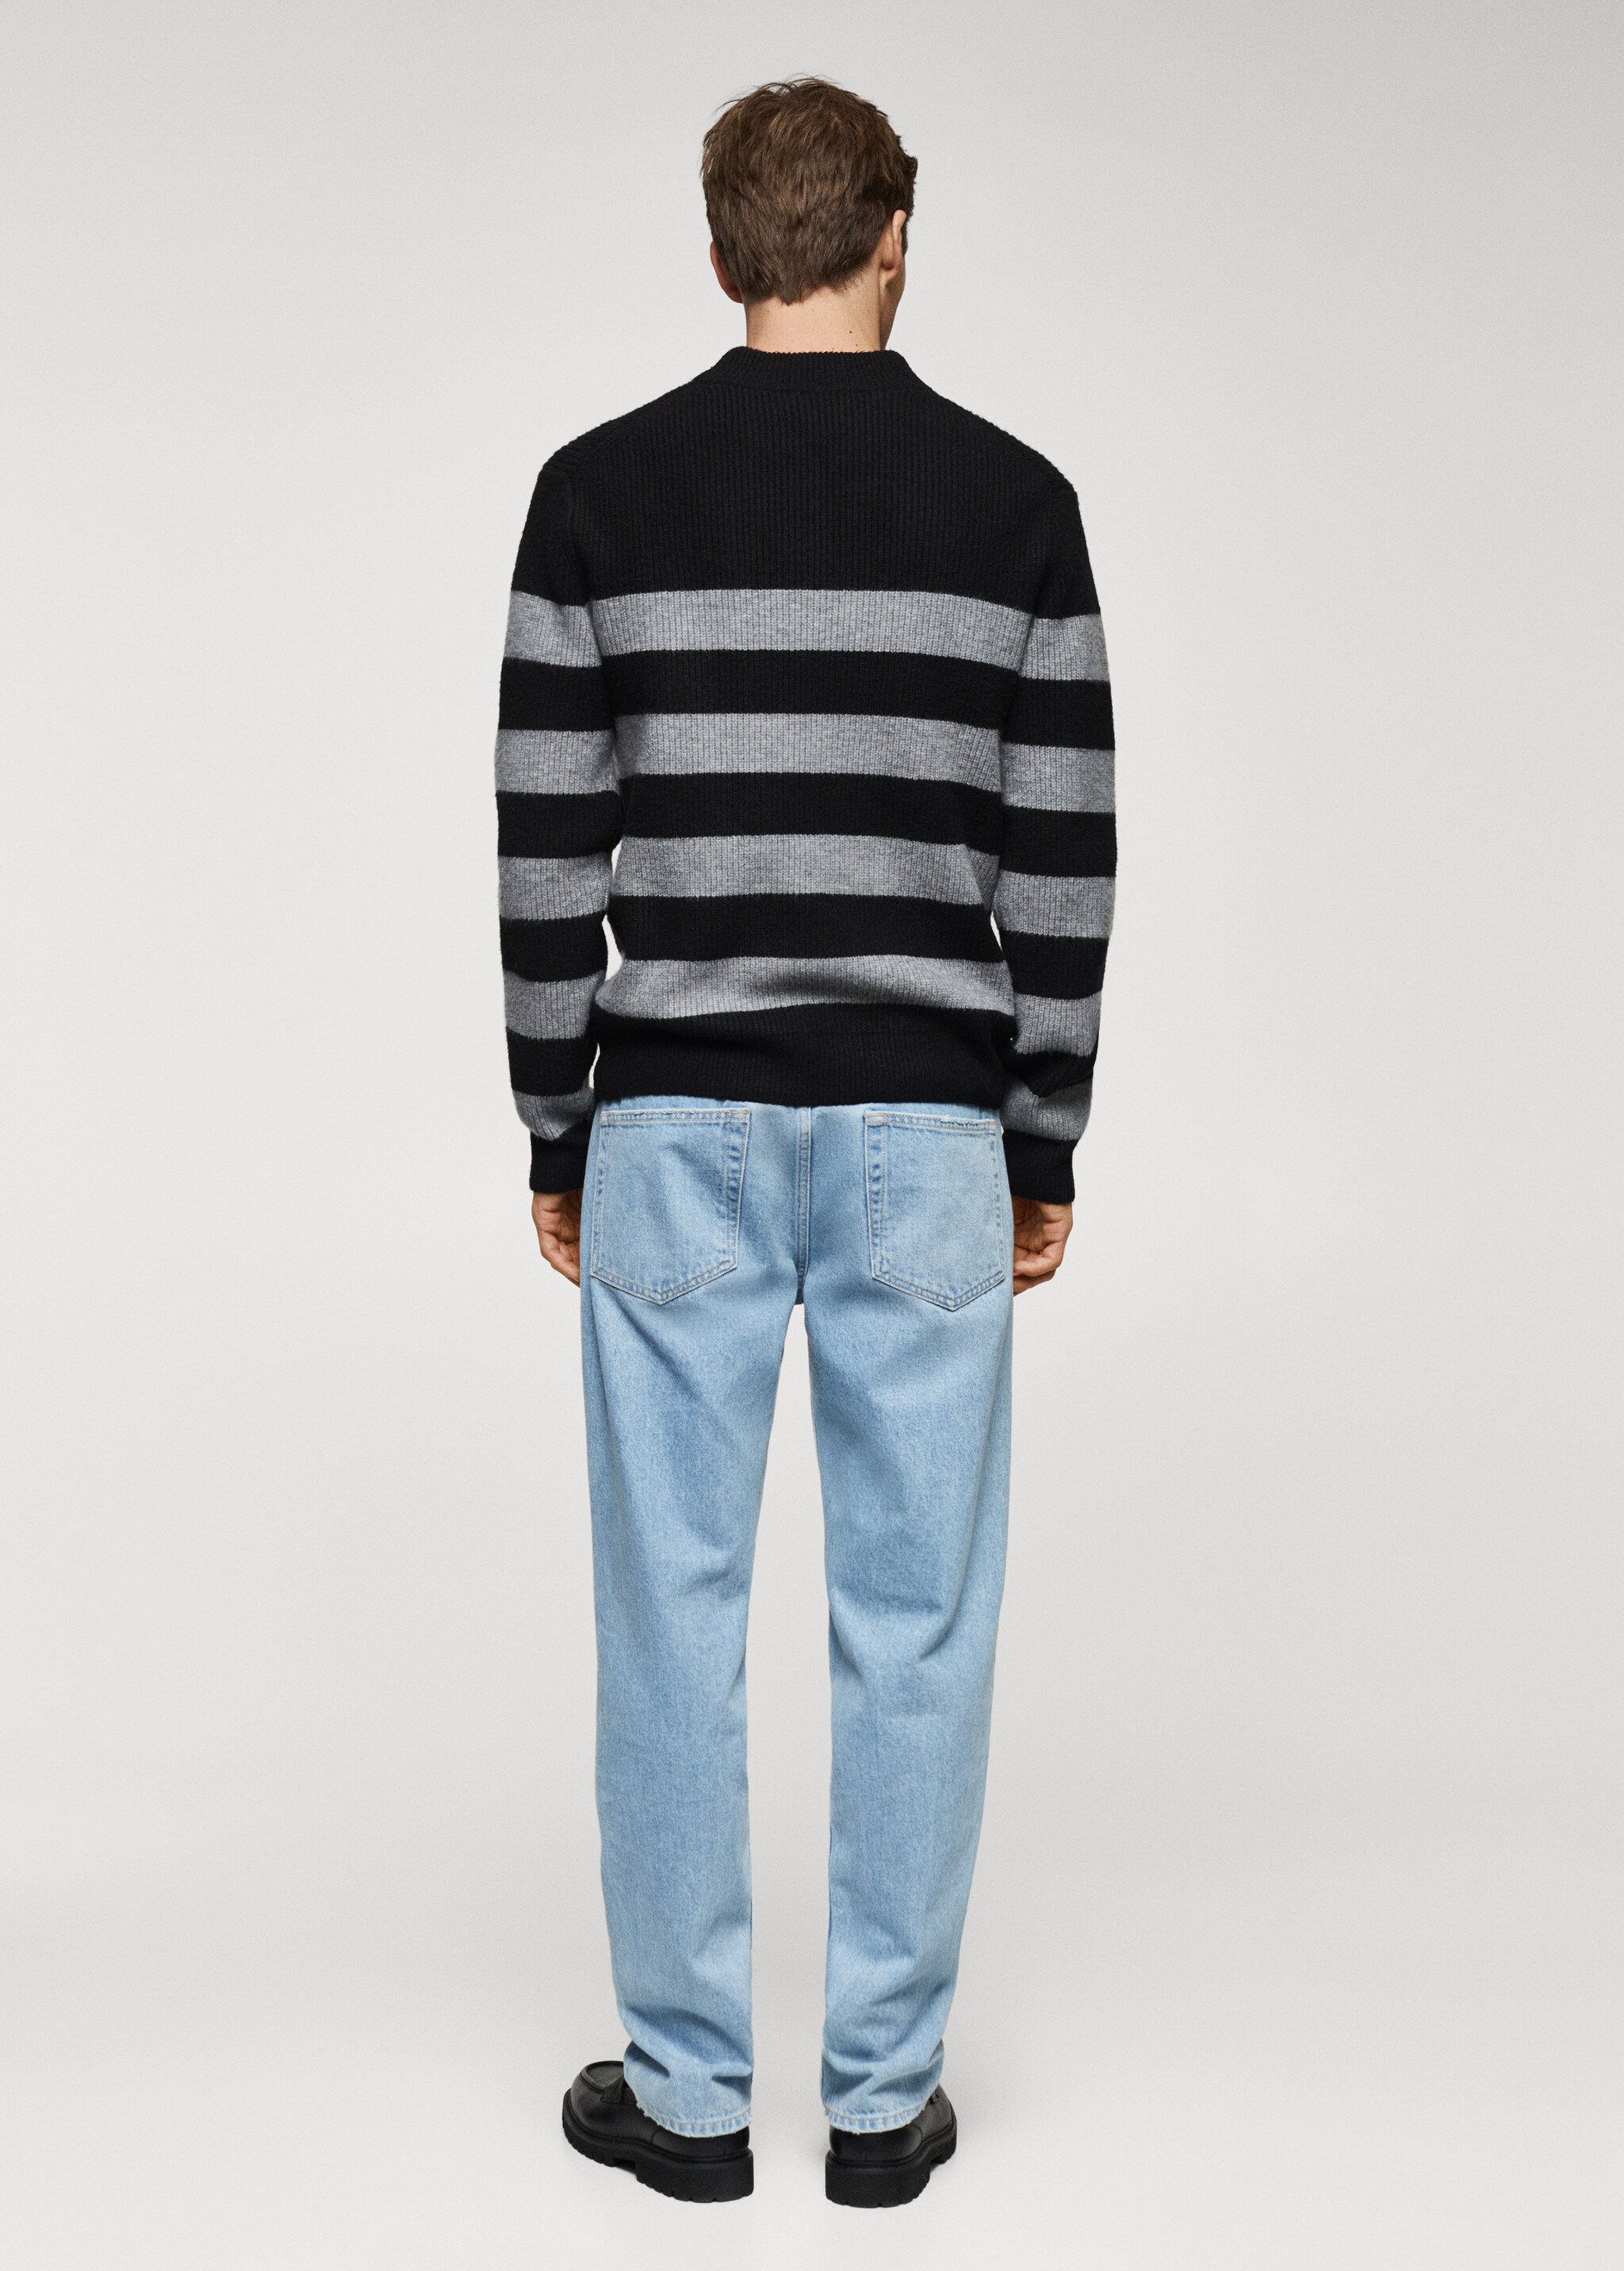 Striped perkins collar sweater - Reverse of the article